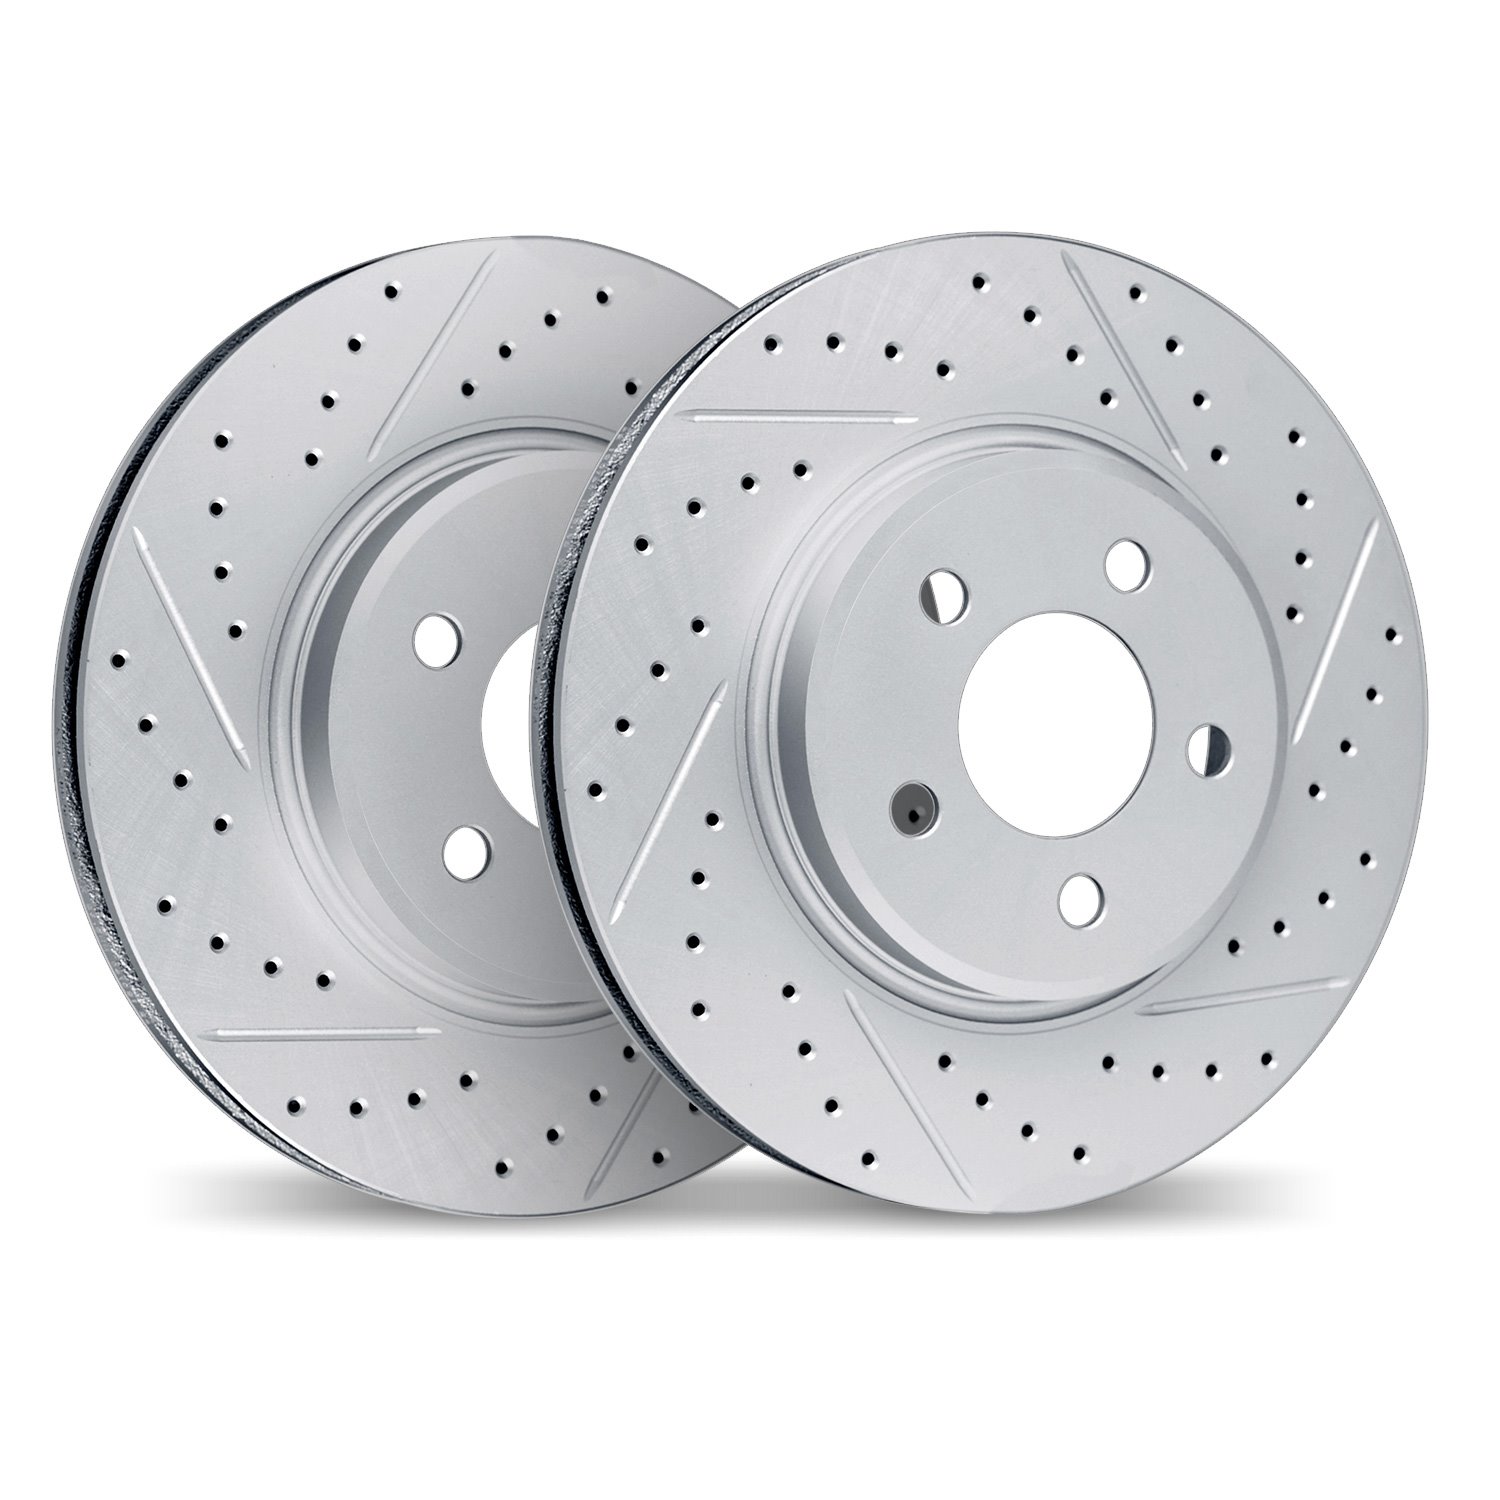 2002-73042 Geoperformance Drilled/Slotted Brake Rotors, Fits Select Audi/Volkswagen, Position: Rear